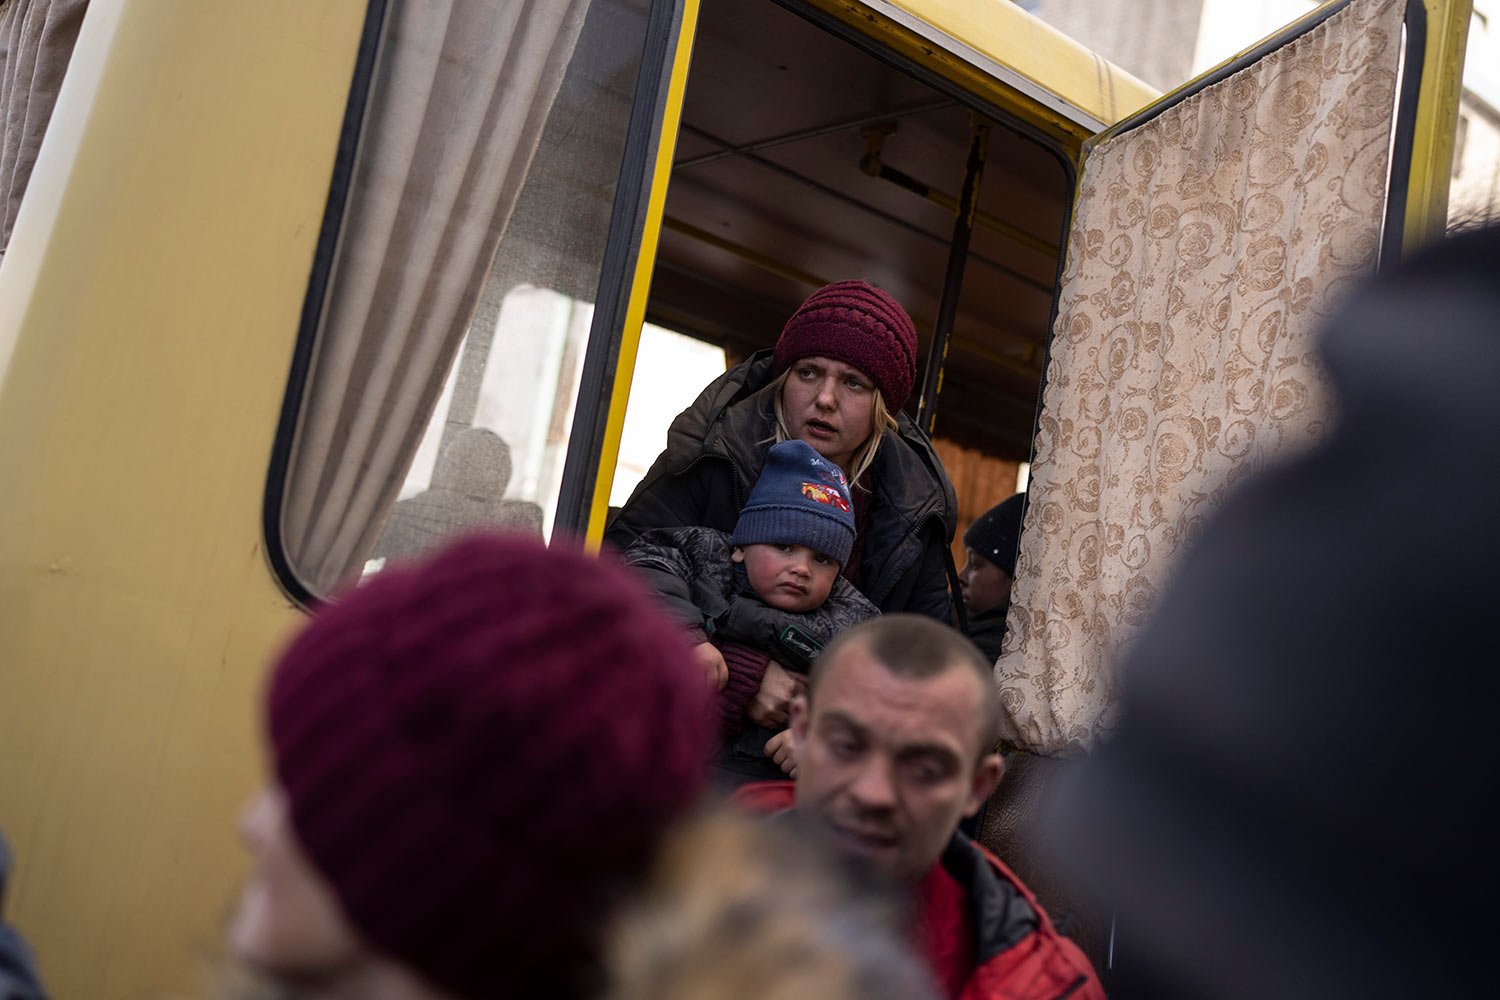  Displaced people disembark from a damaged bus upon their arrival at the Ukrainian Red Cross center in Mykolaiv, southern Ukraine, on Monday, March 28, 2022. (AP Photo/Petros Giannakouris) 